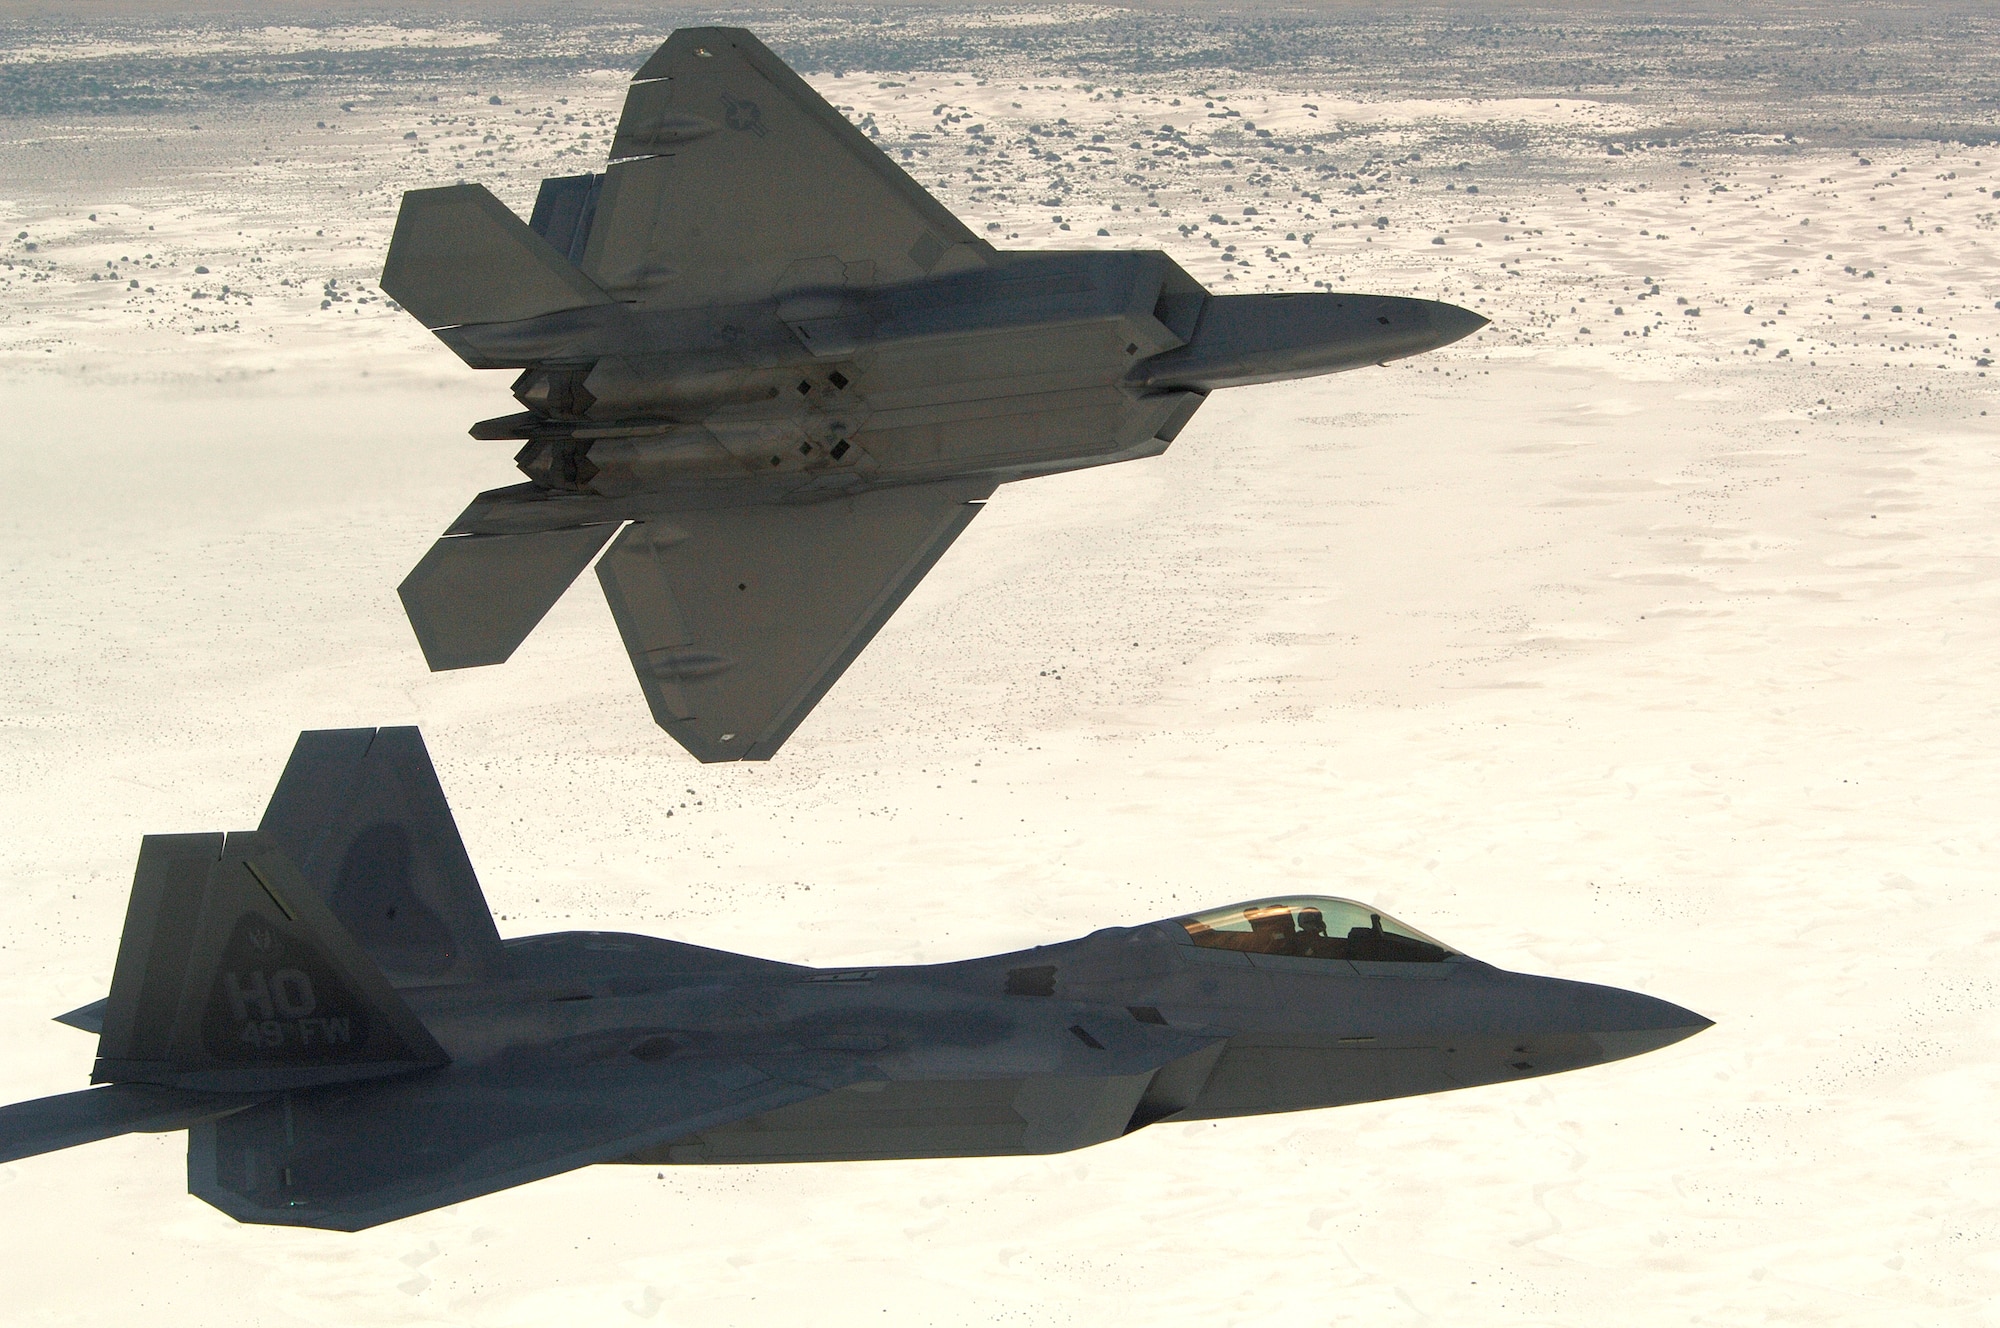 Col. Jeff Harrigian, 49th Fighter Wing commander, and Lt. Col. Mike Hernandez, 7th Fighter Squadron commander, fly a pair of F-22A Raptors over White Sands National Monument, on the way to Holloman Air Force Base, N.M., June 2. The jets are the first two Holloman-tailed F-22's to arrive on base. (U.S. Air Force Photo/ Senior Airman Russell Scalf)